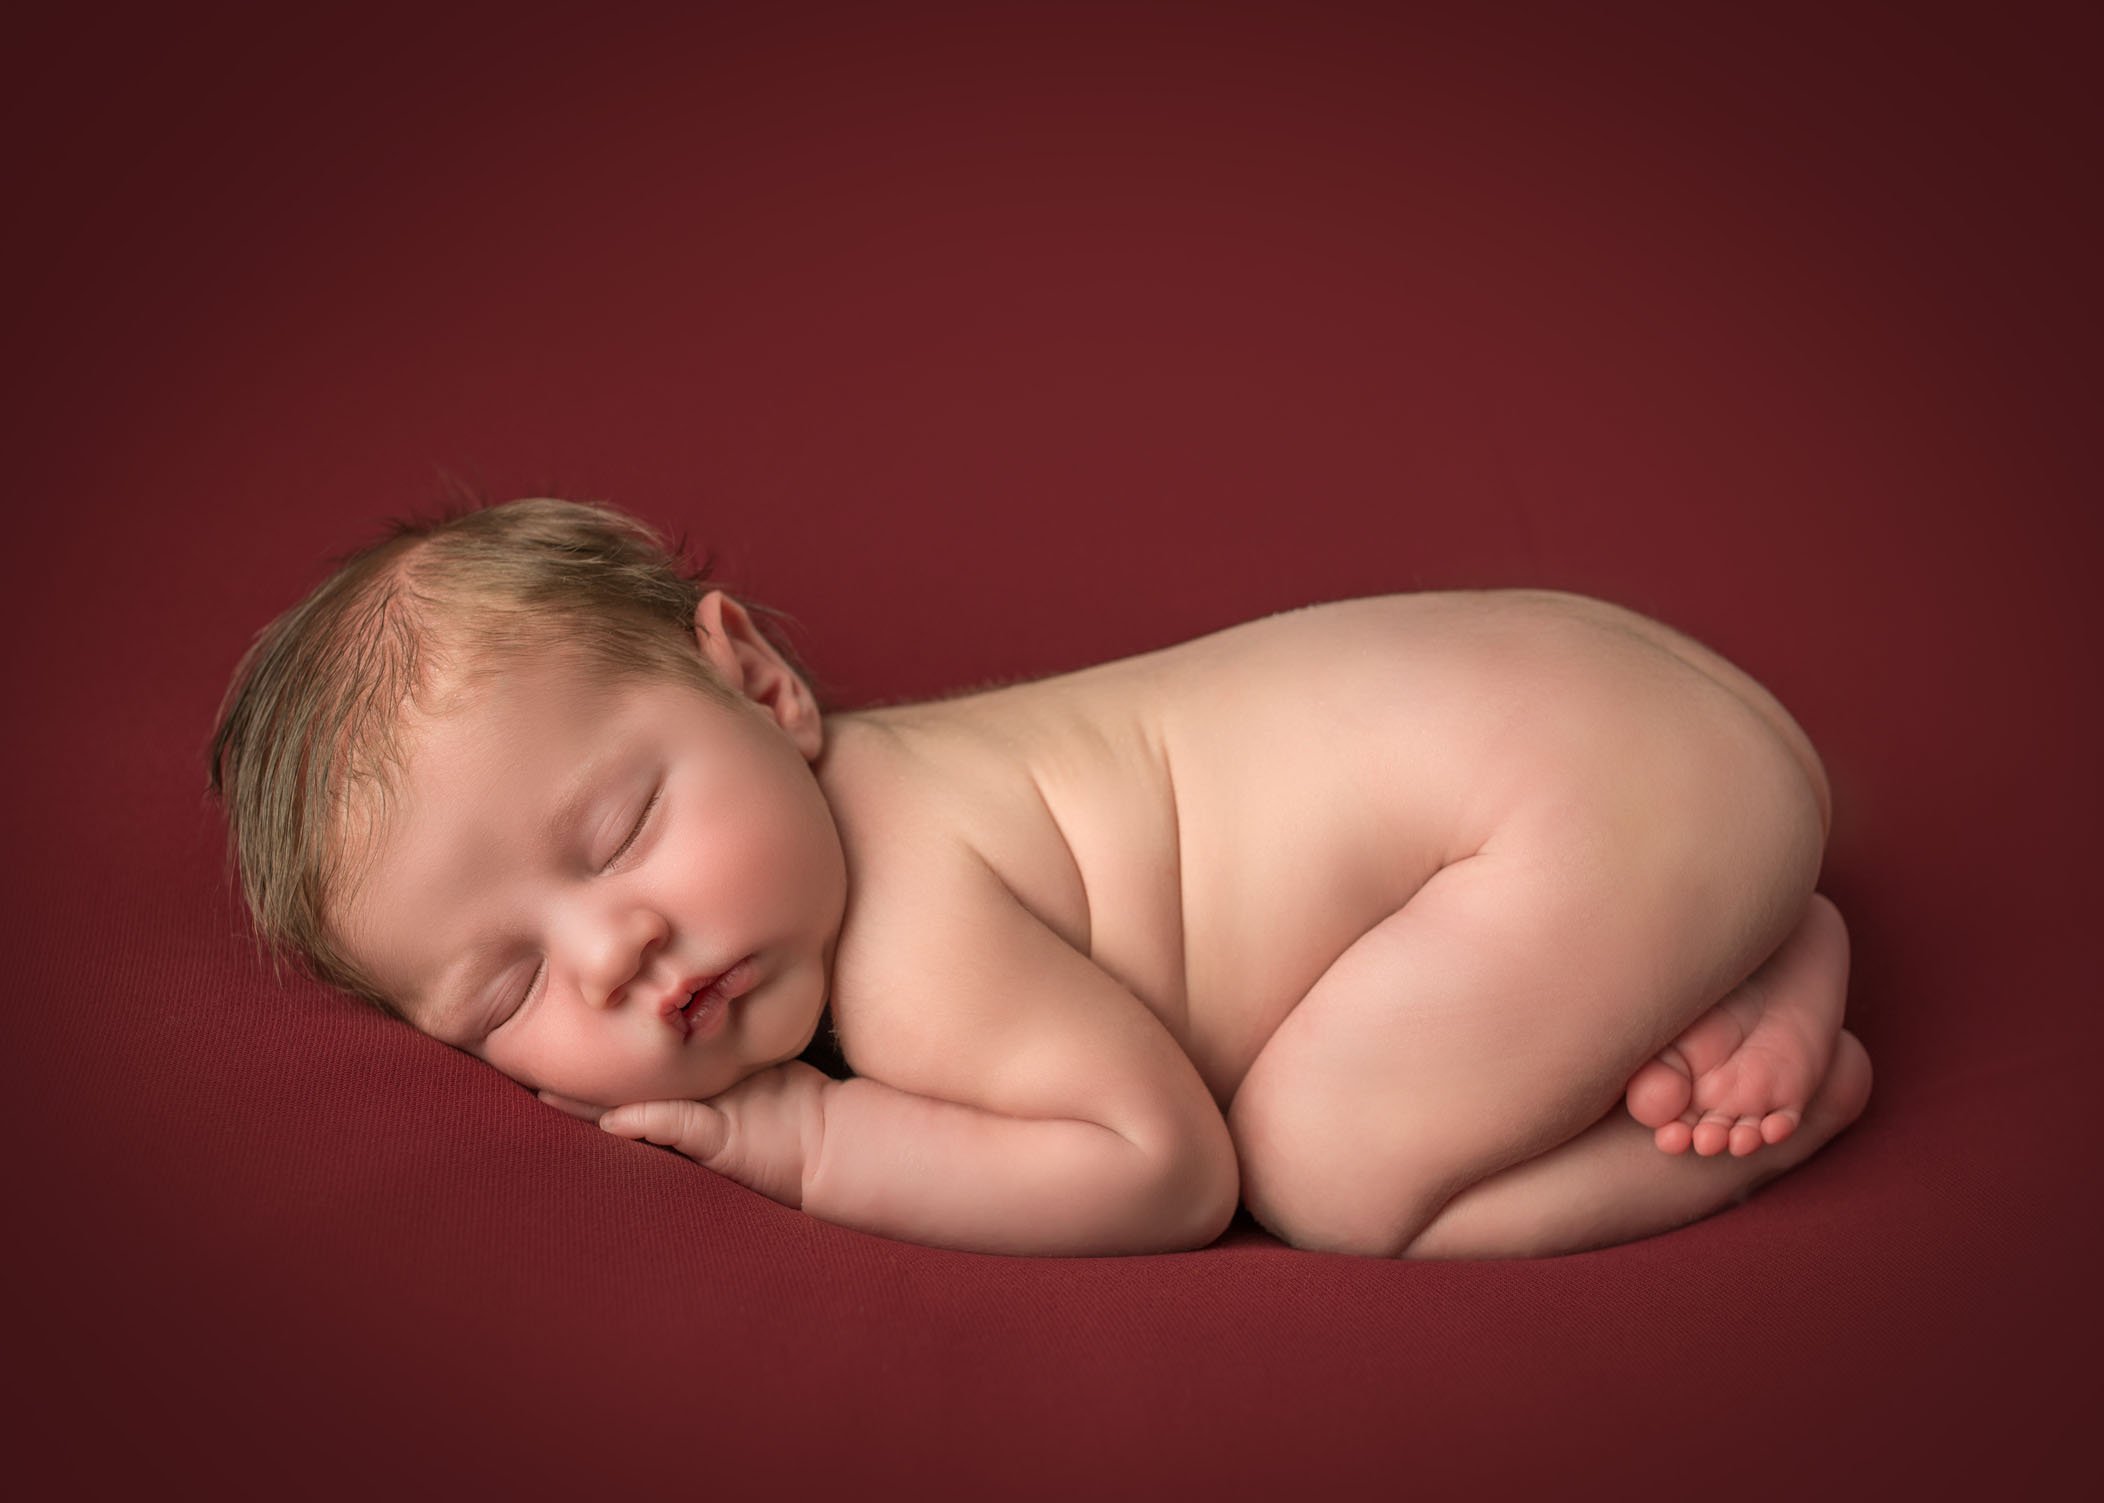 Connecticut Newborn Photographer baby sleeping on red background in bum up pose